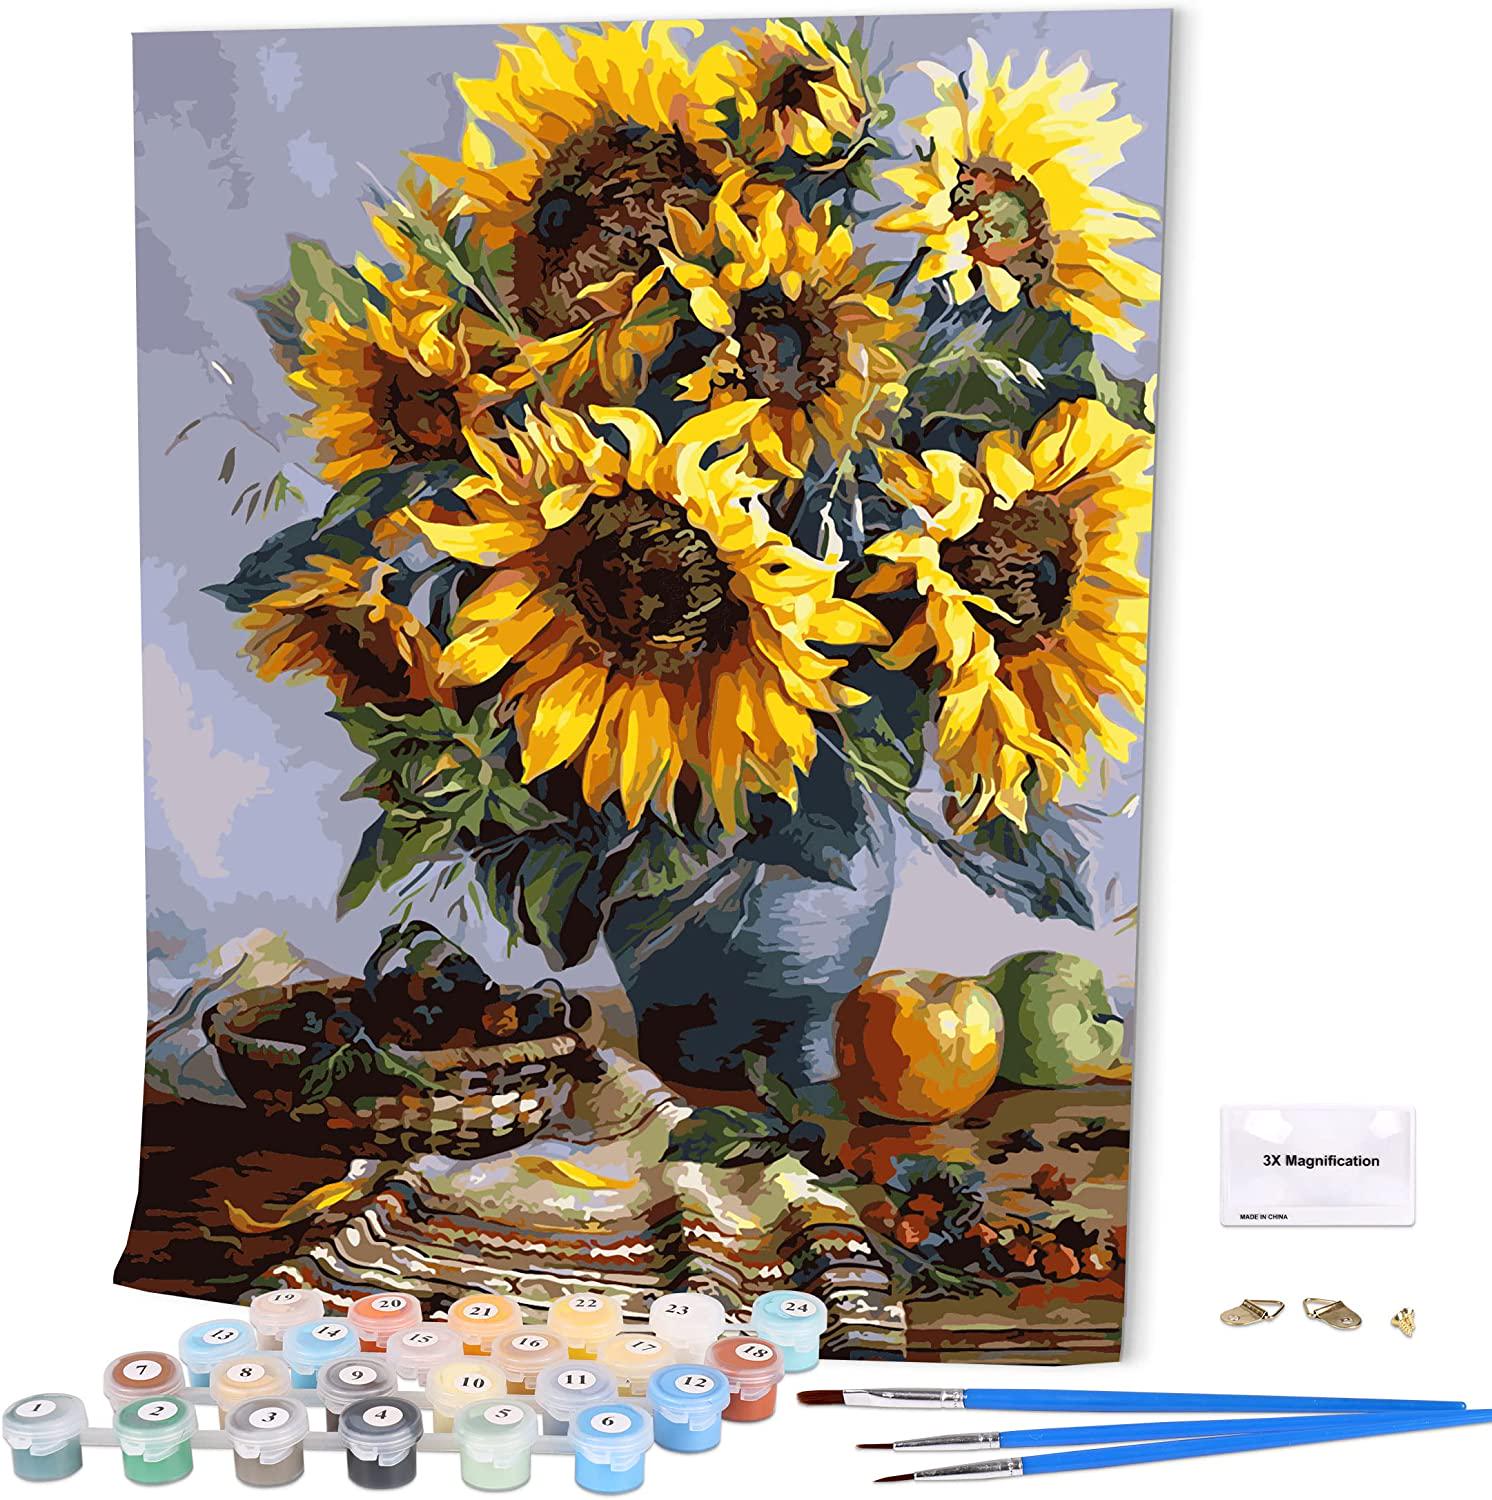 LIUDAO, LIUDAO Sunflower DIY Oil Painting on Canvas Paint Number Kit Adults Beginner 16x20 Inches Without Frame